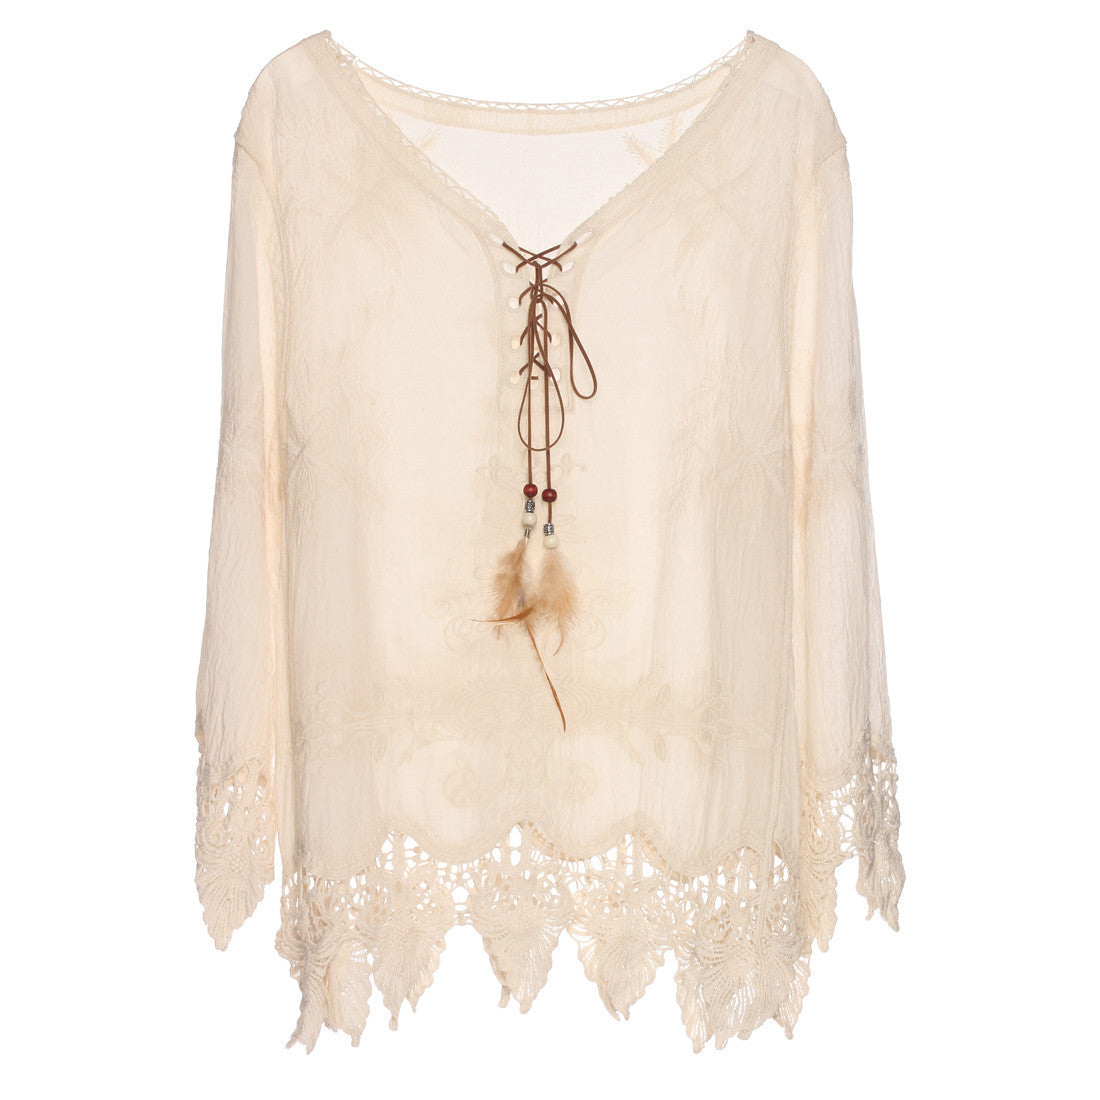 Online discount shop Australia - Gypsy Feather Duster Tops Hippie Boho People Style With Retro Embroidery Fishtail Lace Patch Design Tops Tee t shirt women